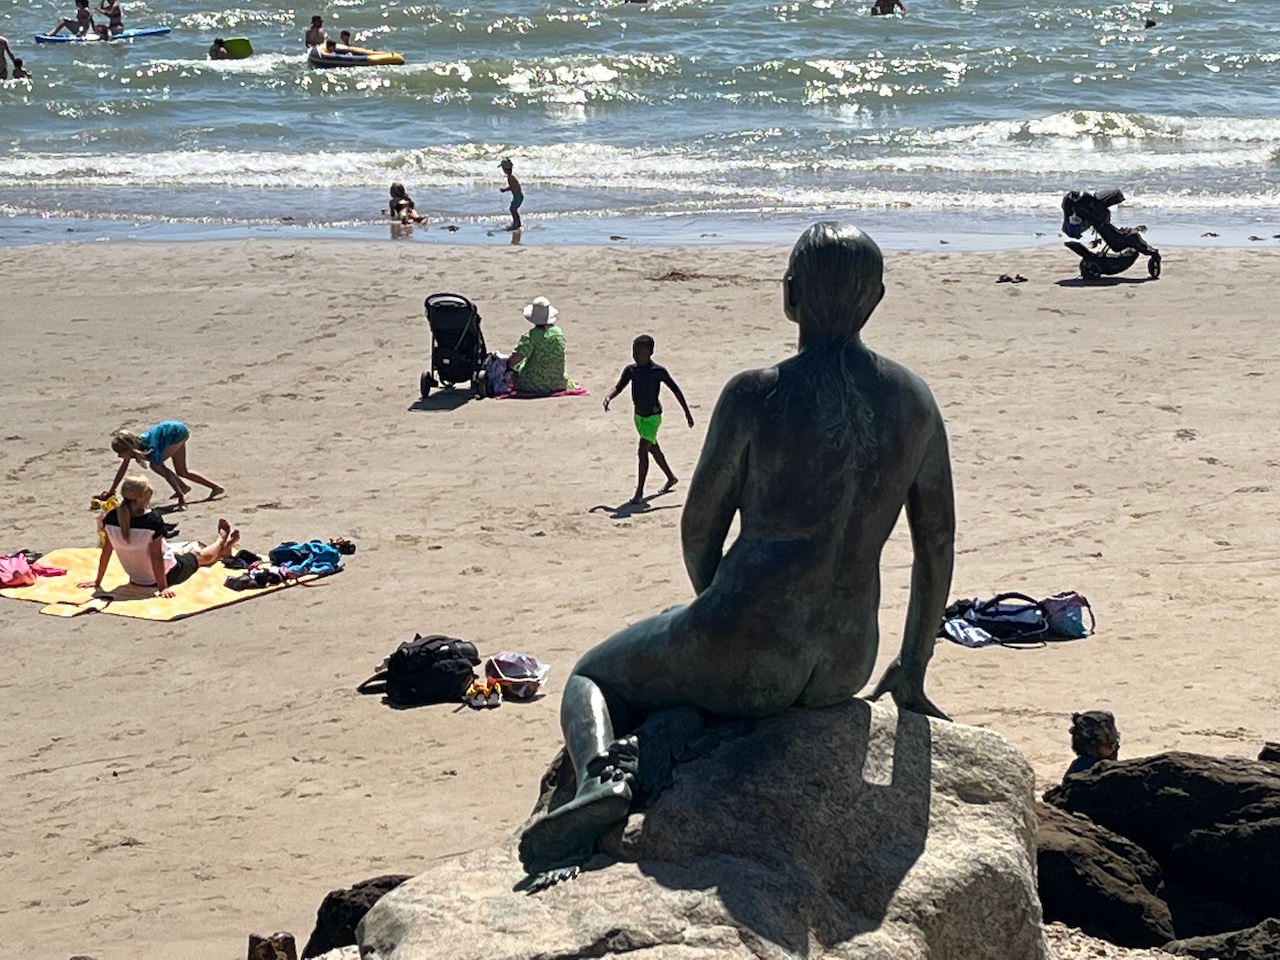 A statue of a mermaid sitting on a rock, overlooking Sunny Sands beach in Folkestone.